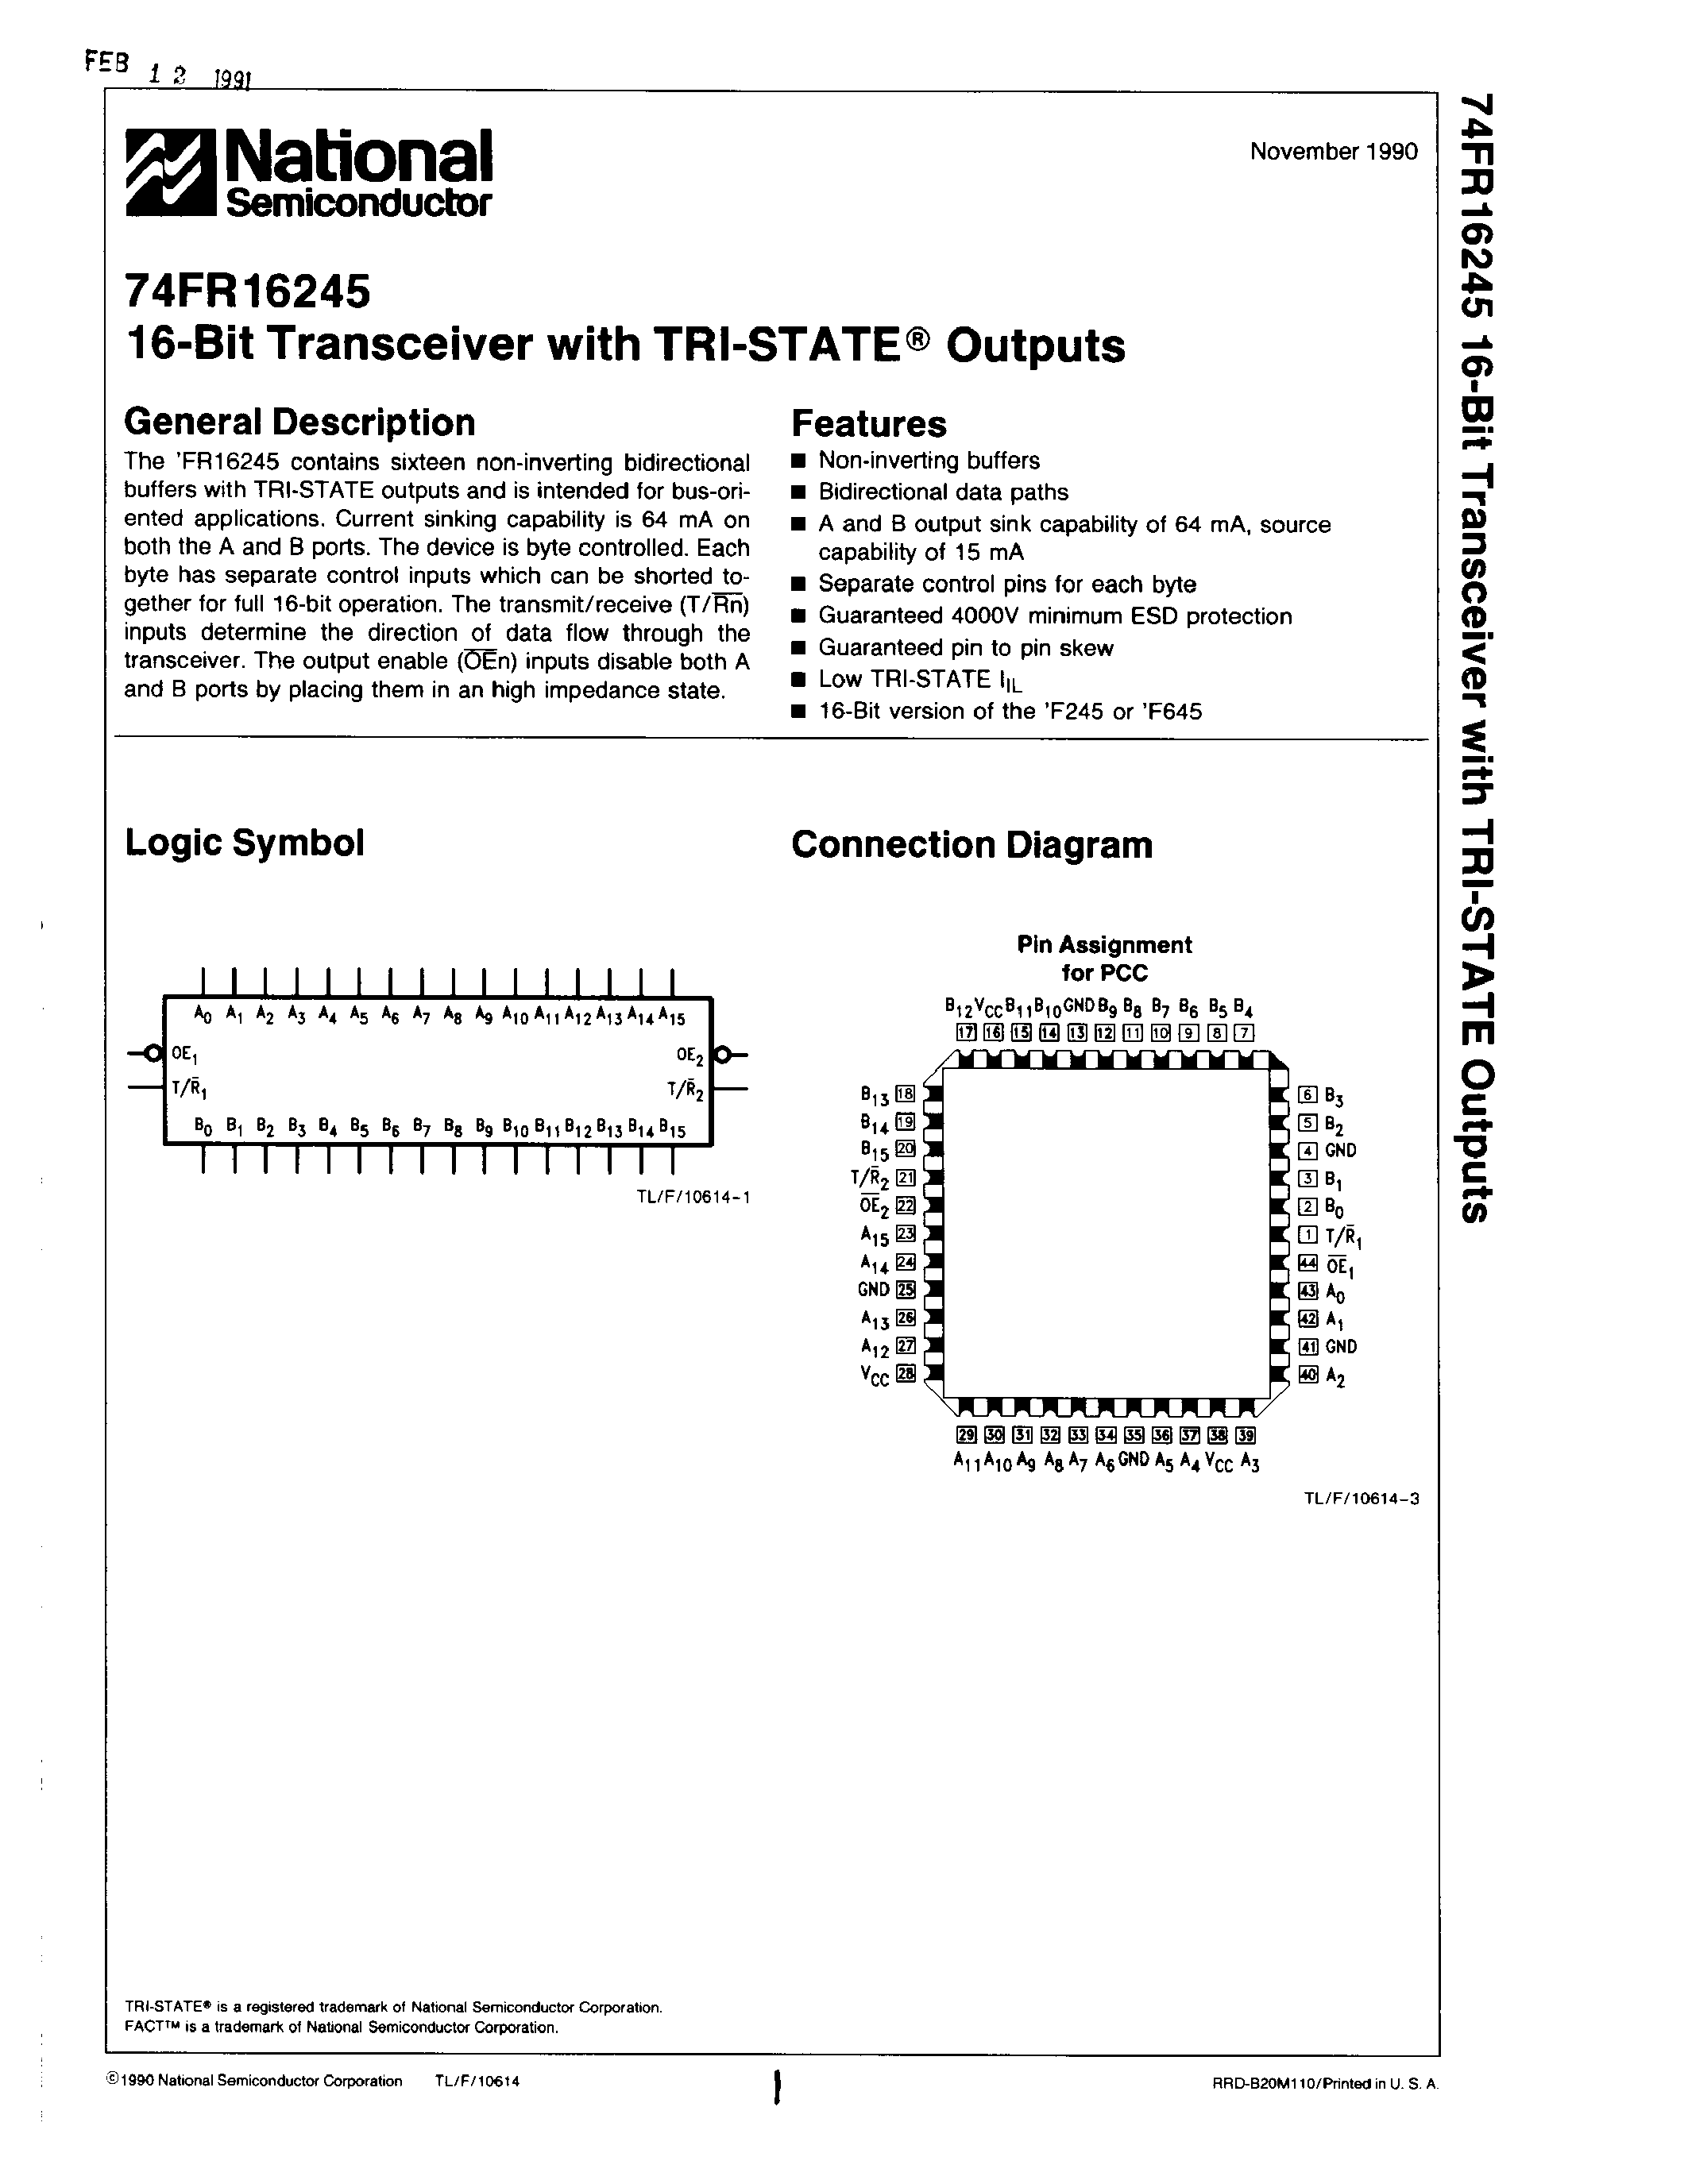 Datasheet 74FR16245 - 16-Bit Transceiver with TRI-STATE Outputs page 1